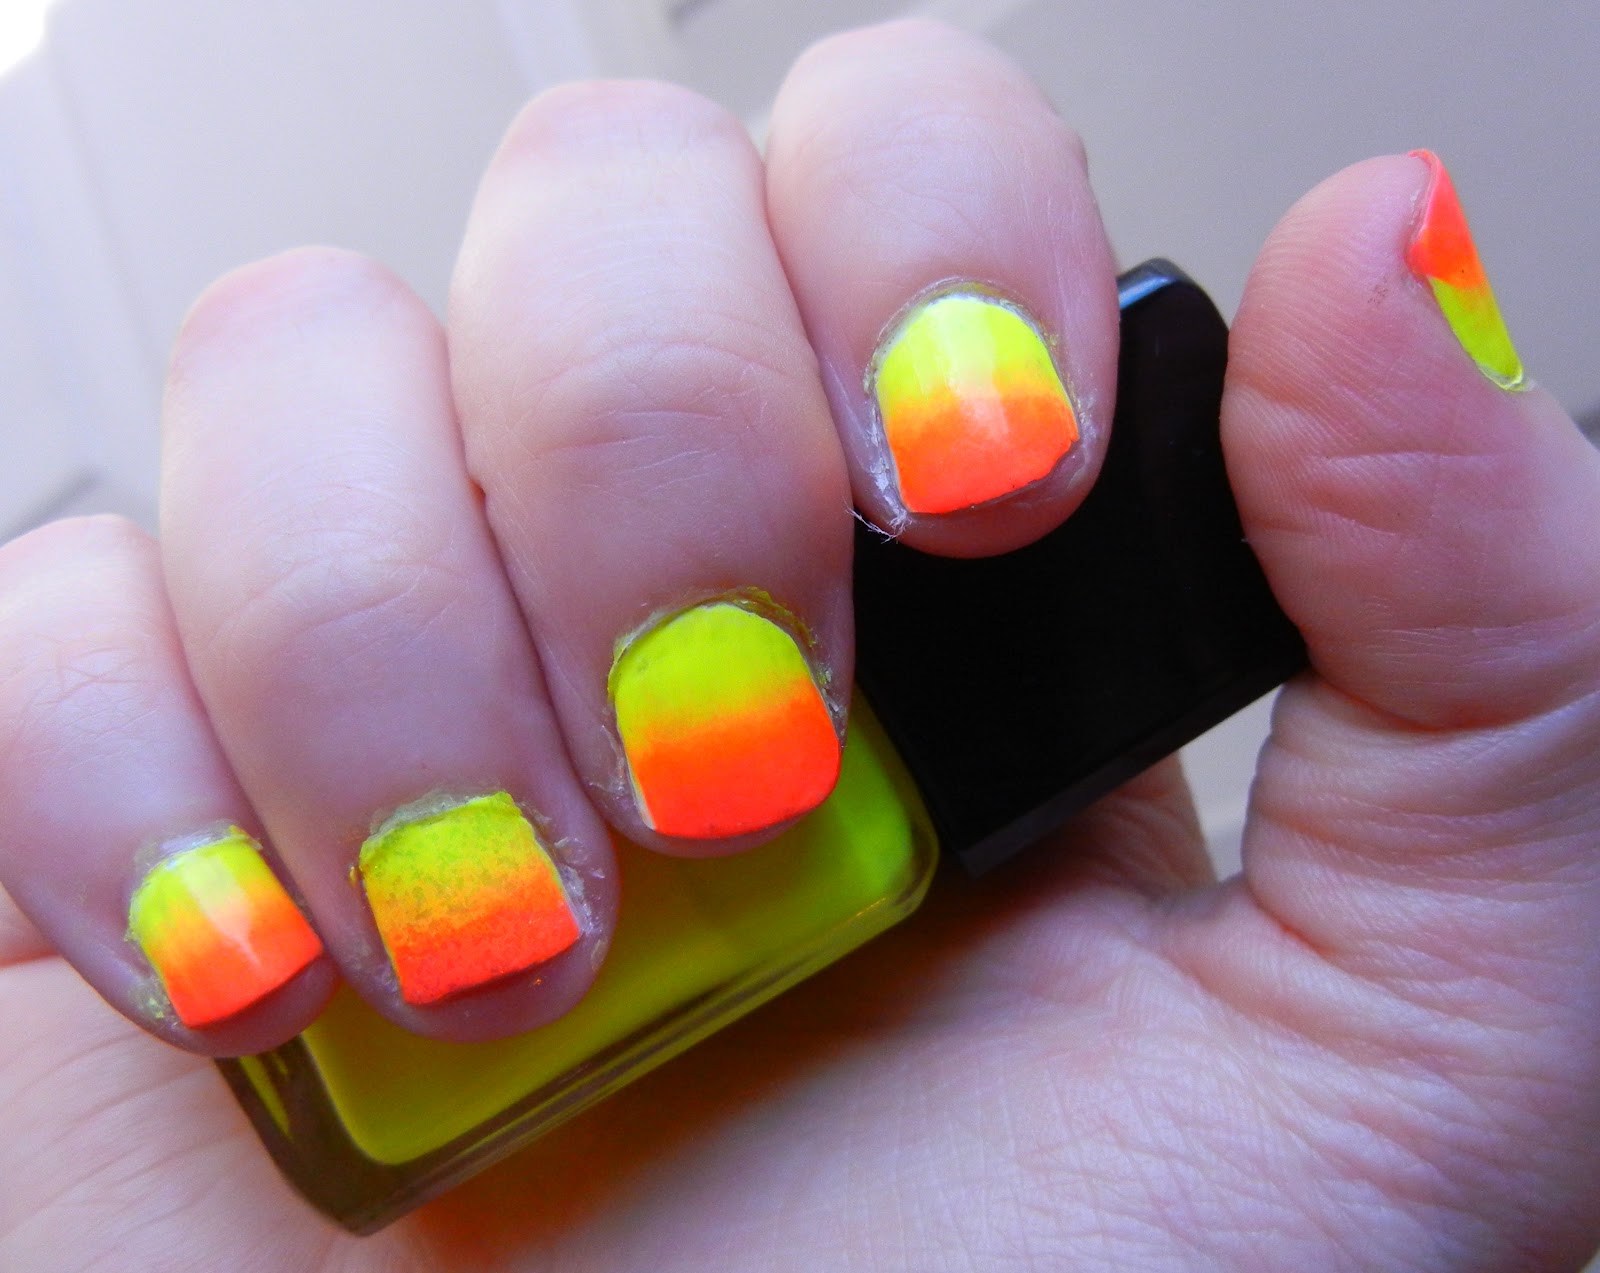 NykkeyB: Neon Ombre/Gradient Nail Tutorial Nails by cambria on instagram. 